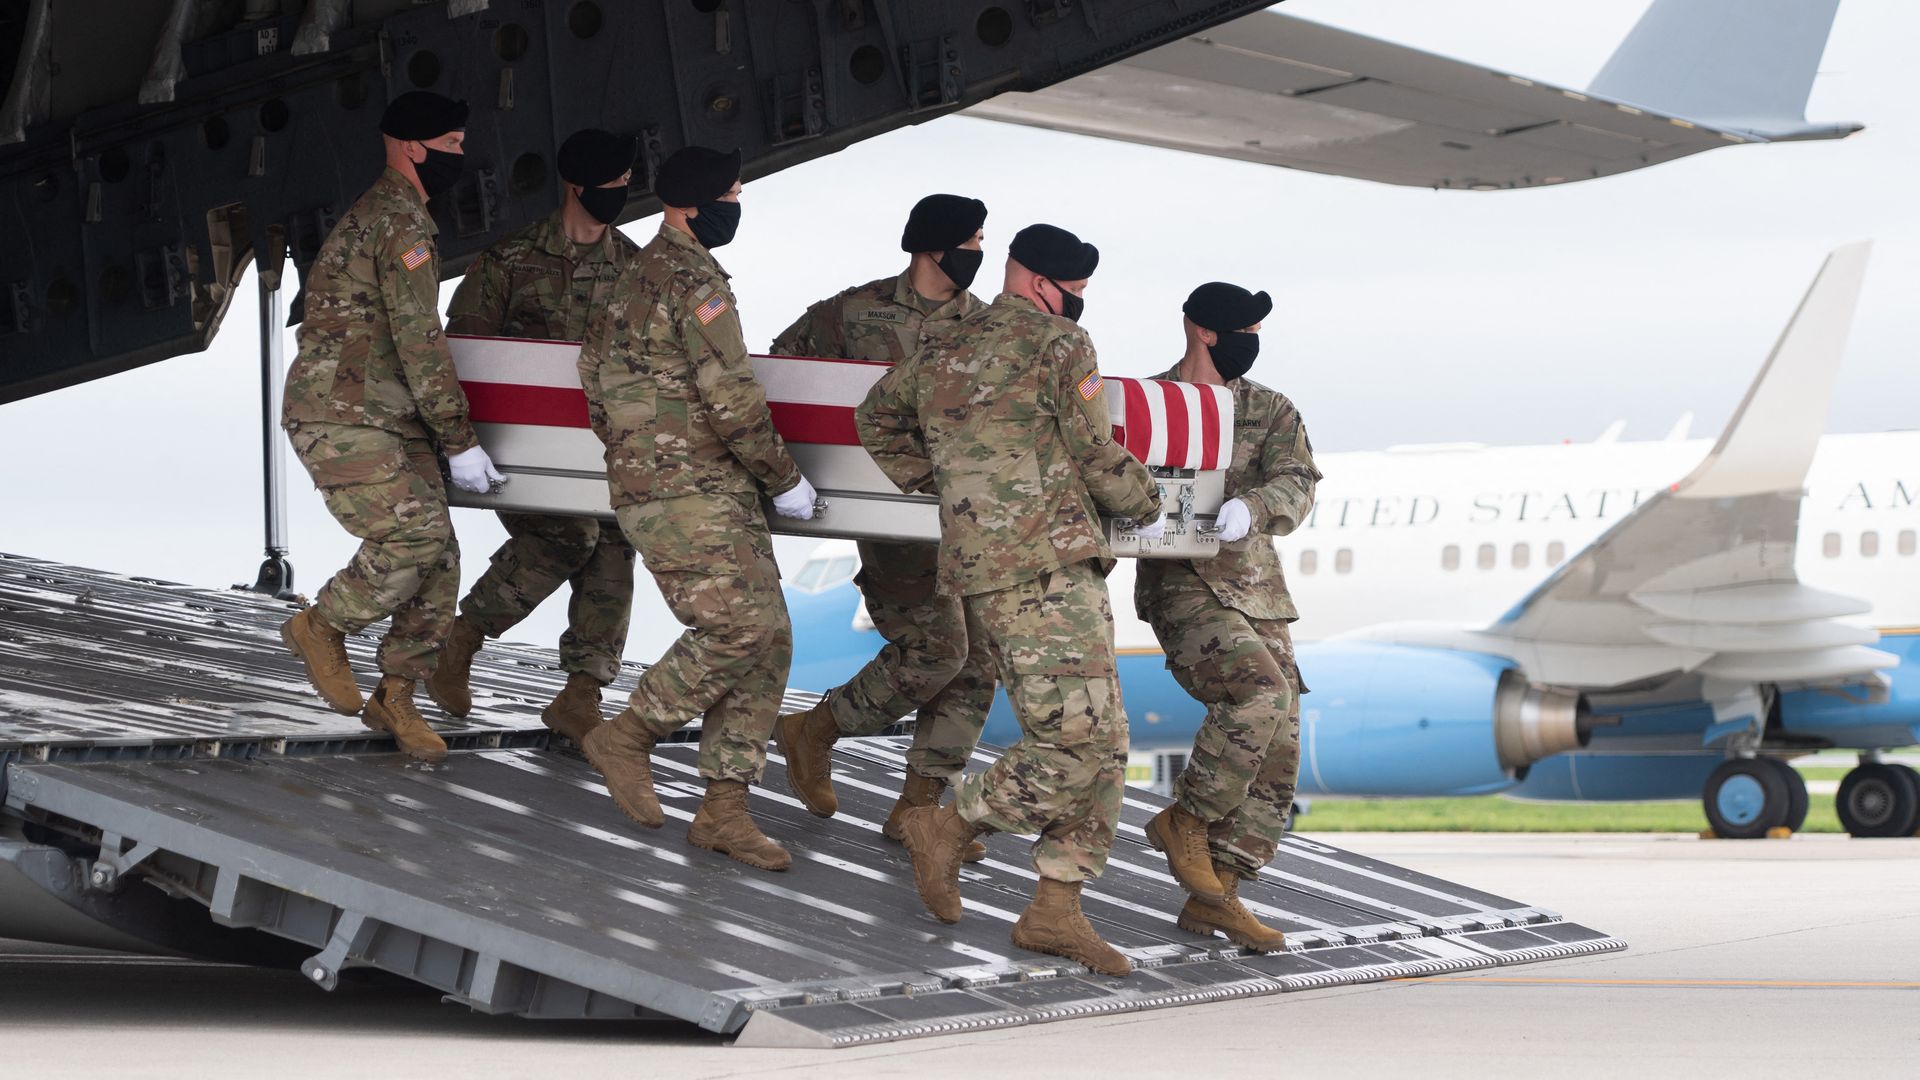 Six U.S. soldiers carry a coffin containing the remains of Army Staff Sgt. Ryan Knauss off a military aircraft.